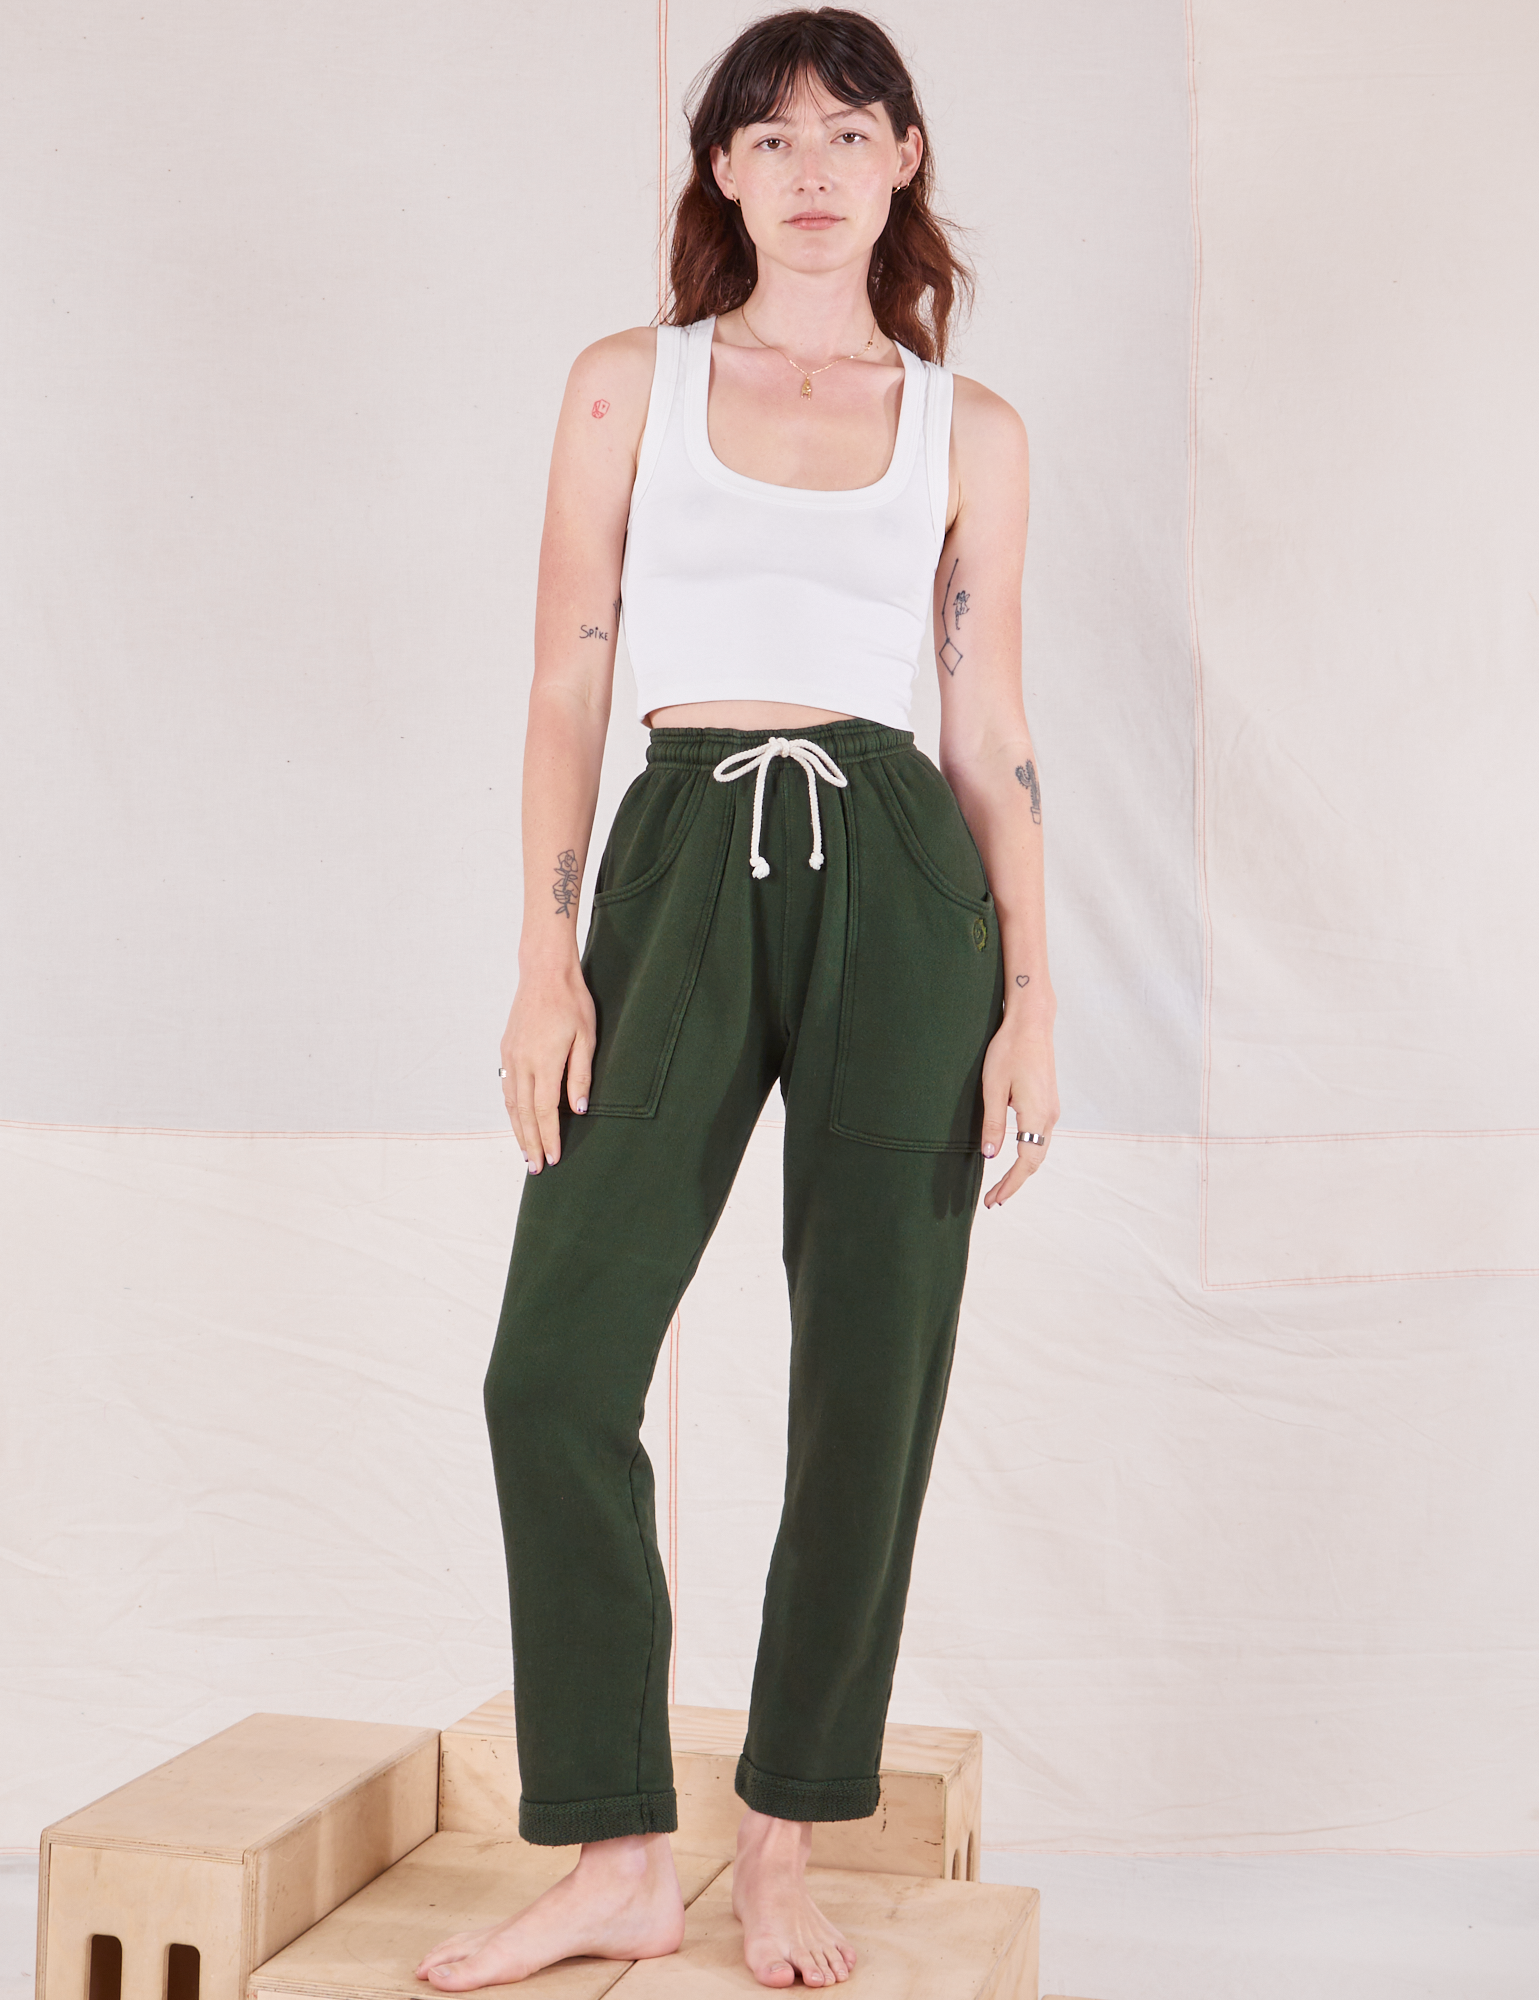 Alex is 5&#39;8&quot; and wearing P Rolled Cuff Sweat Pants in Swamp Green paired with vintage off-white Cropped Tank Top